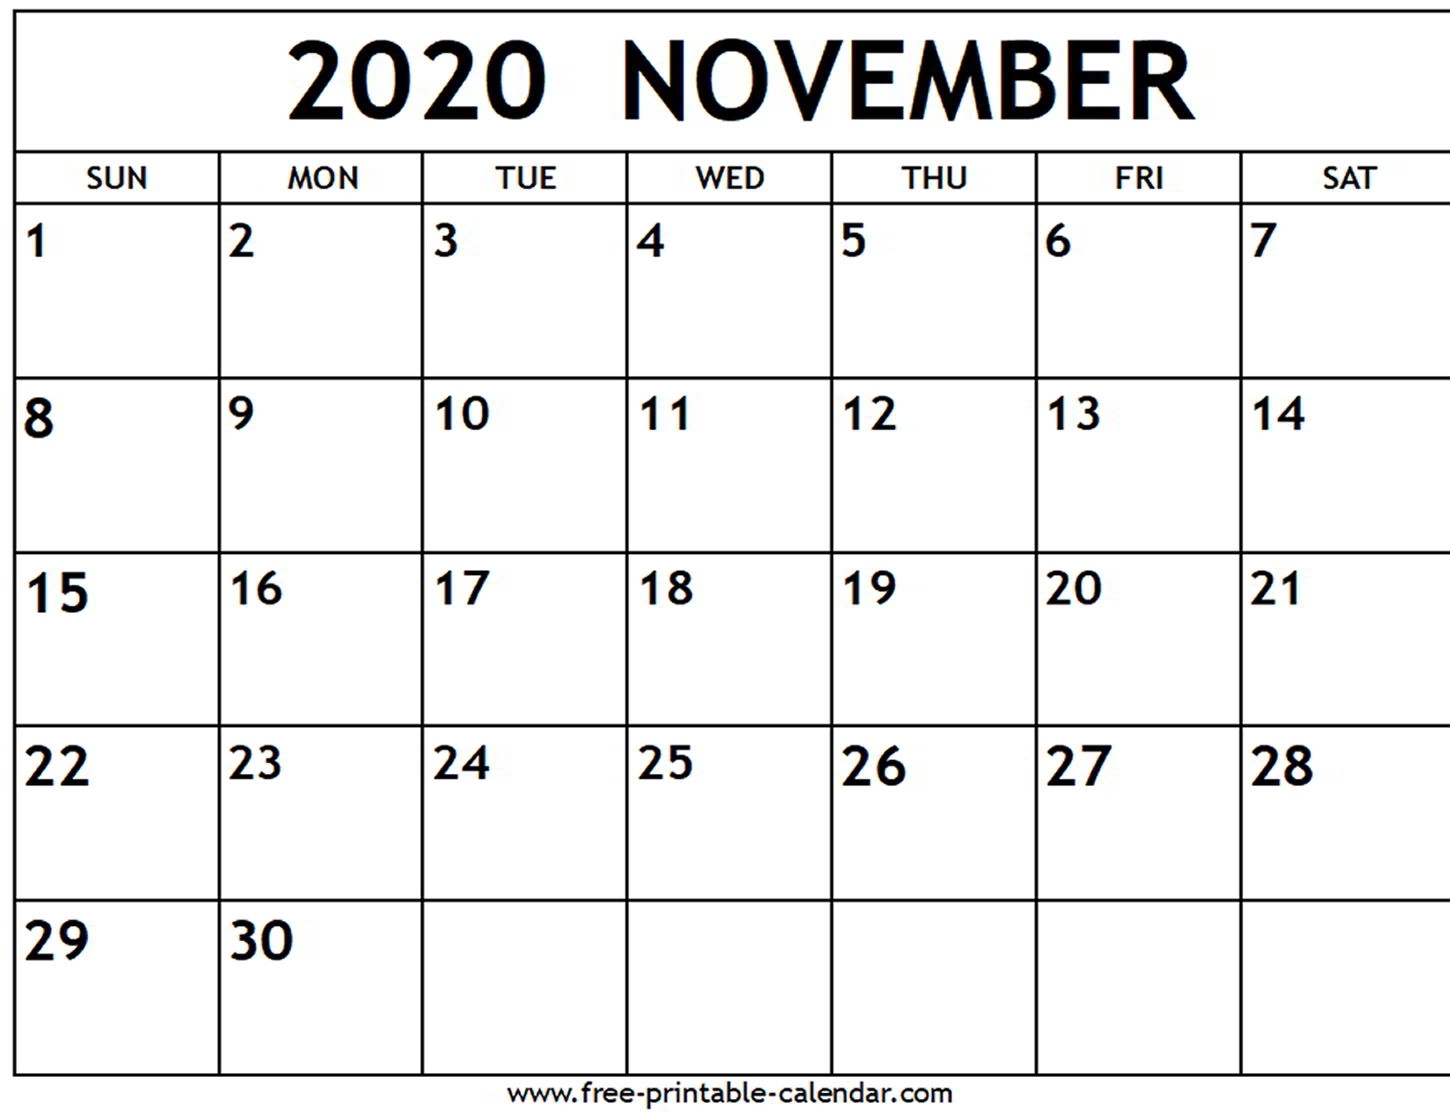 November 2020 Calendar - Free-Printable-Calendar intended for Print Free Calendars 2020Without Downloading